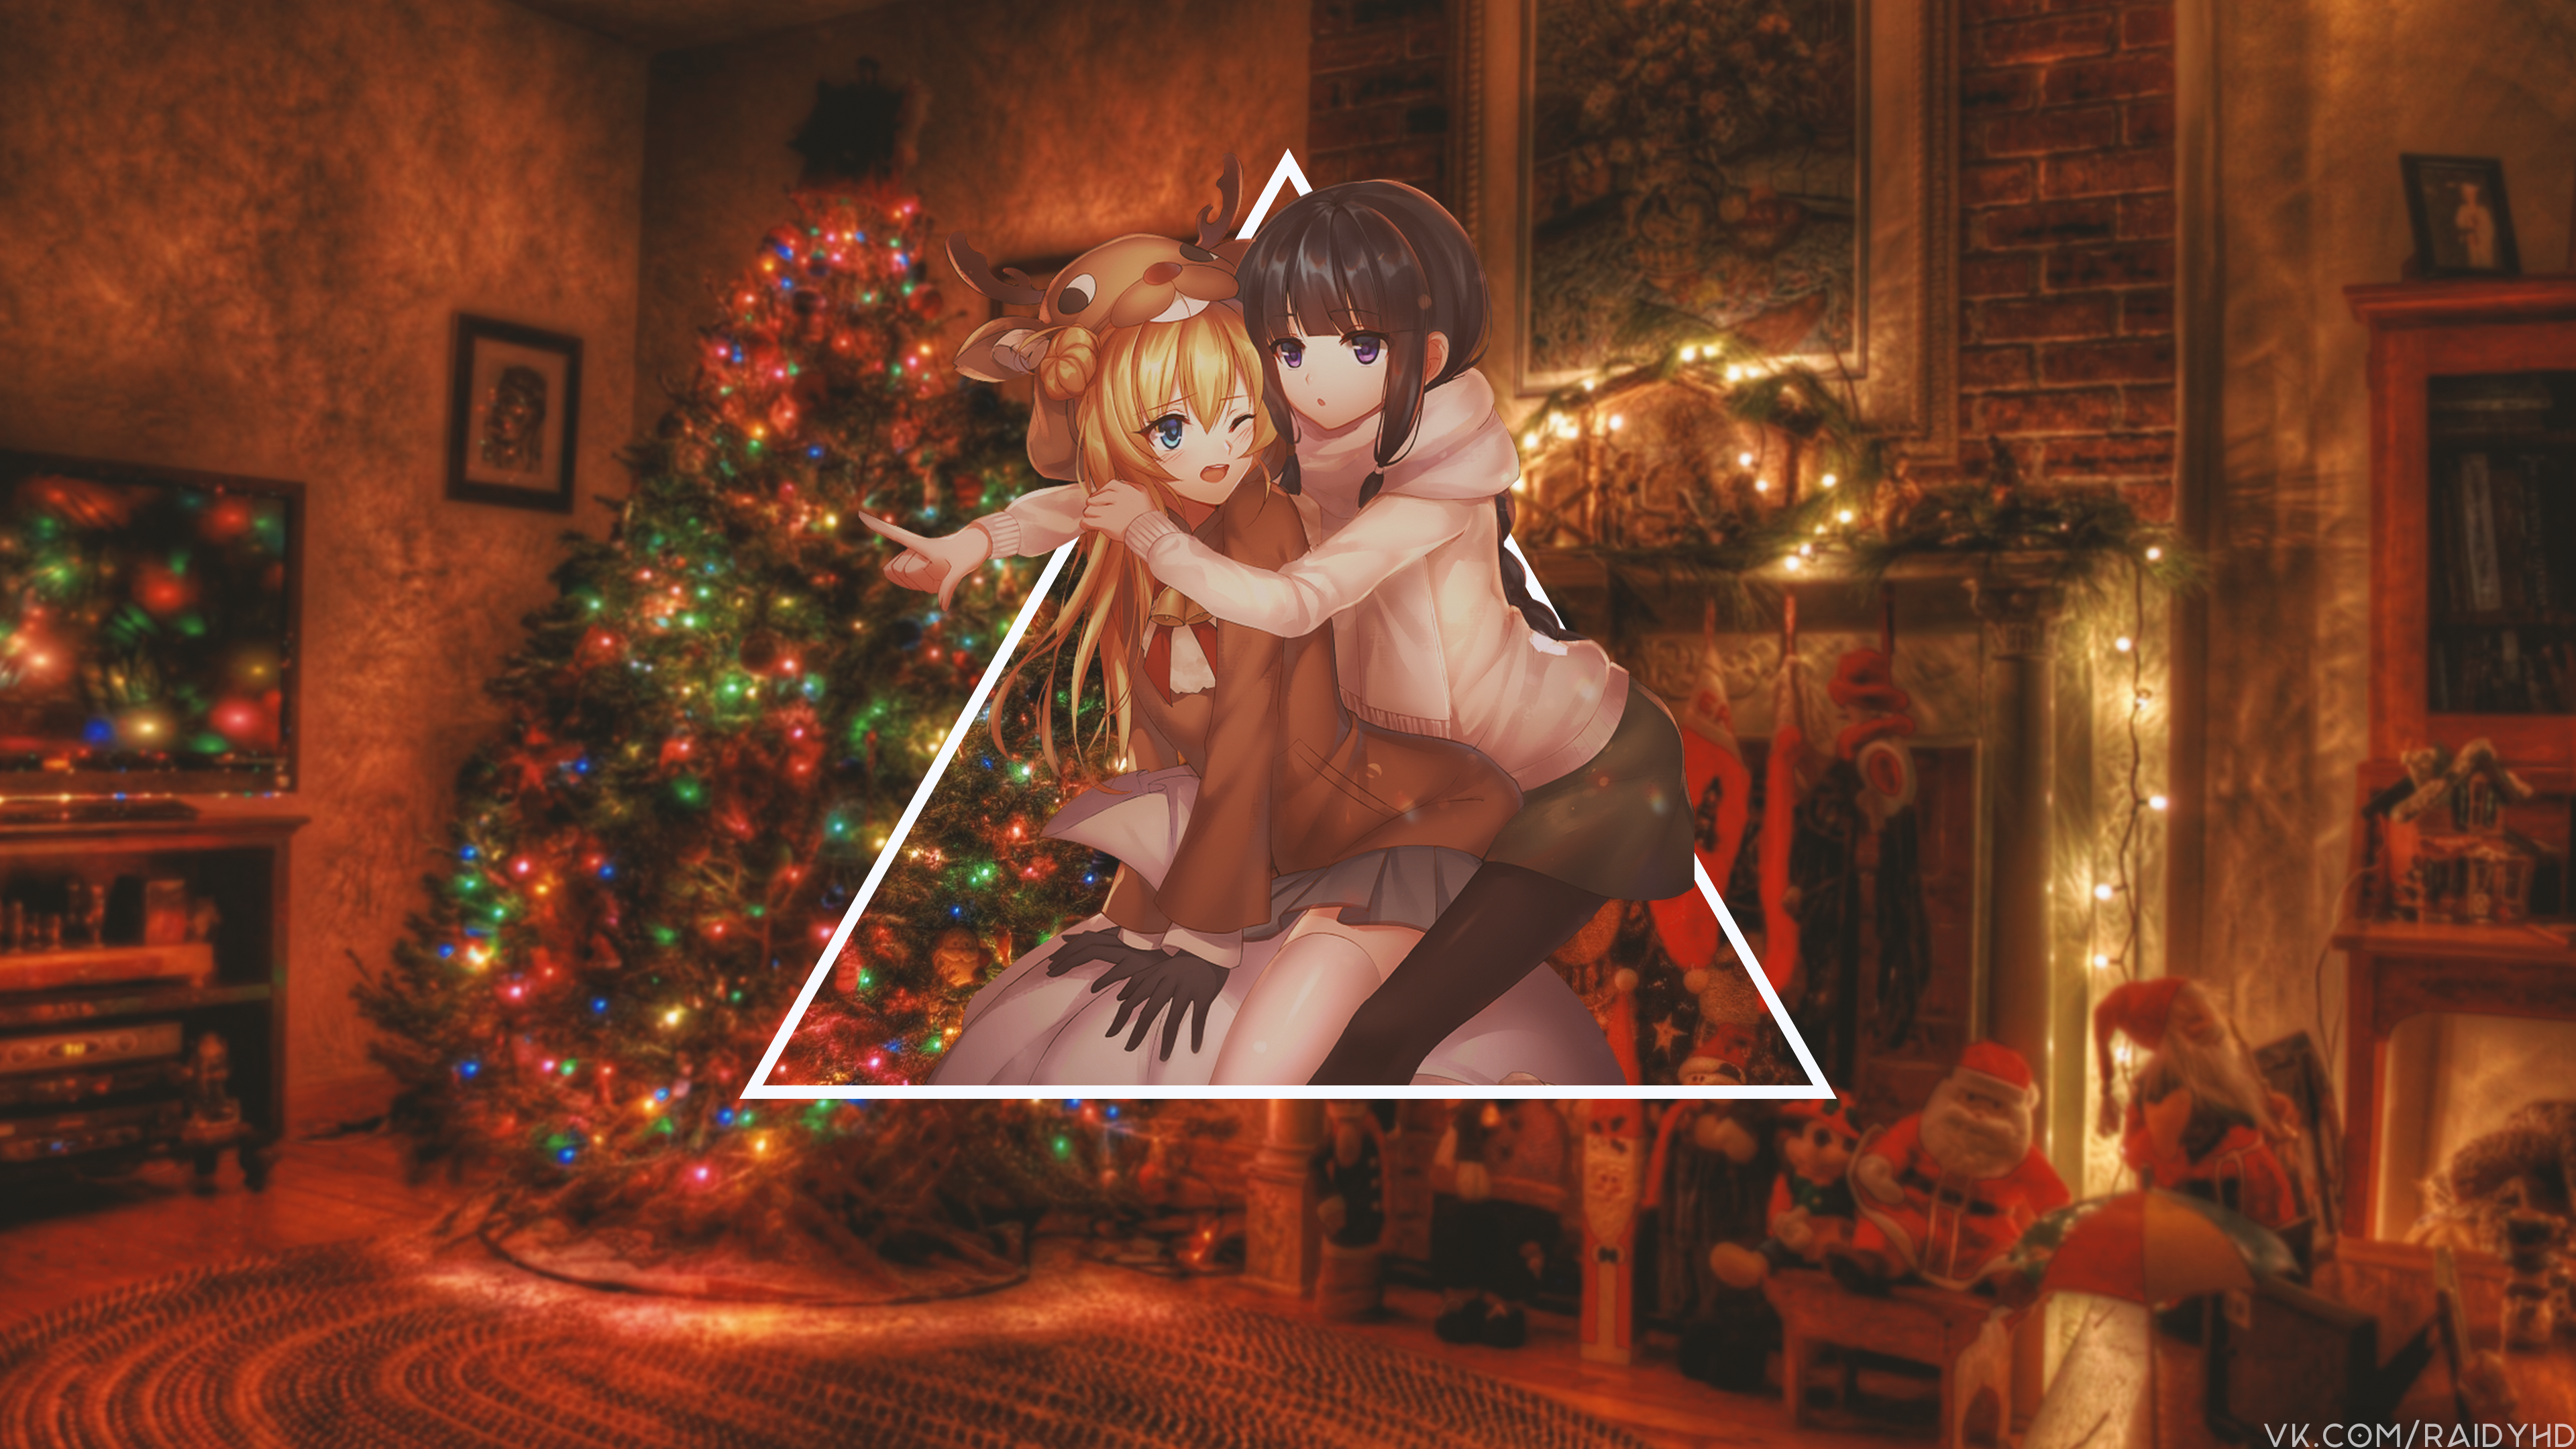 Anime 3840x2160 anime girls anime picture-in-picture Christmas Christmas tree